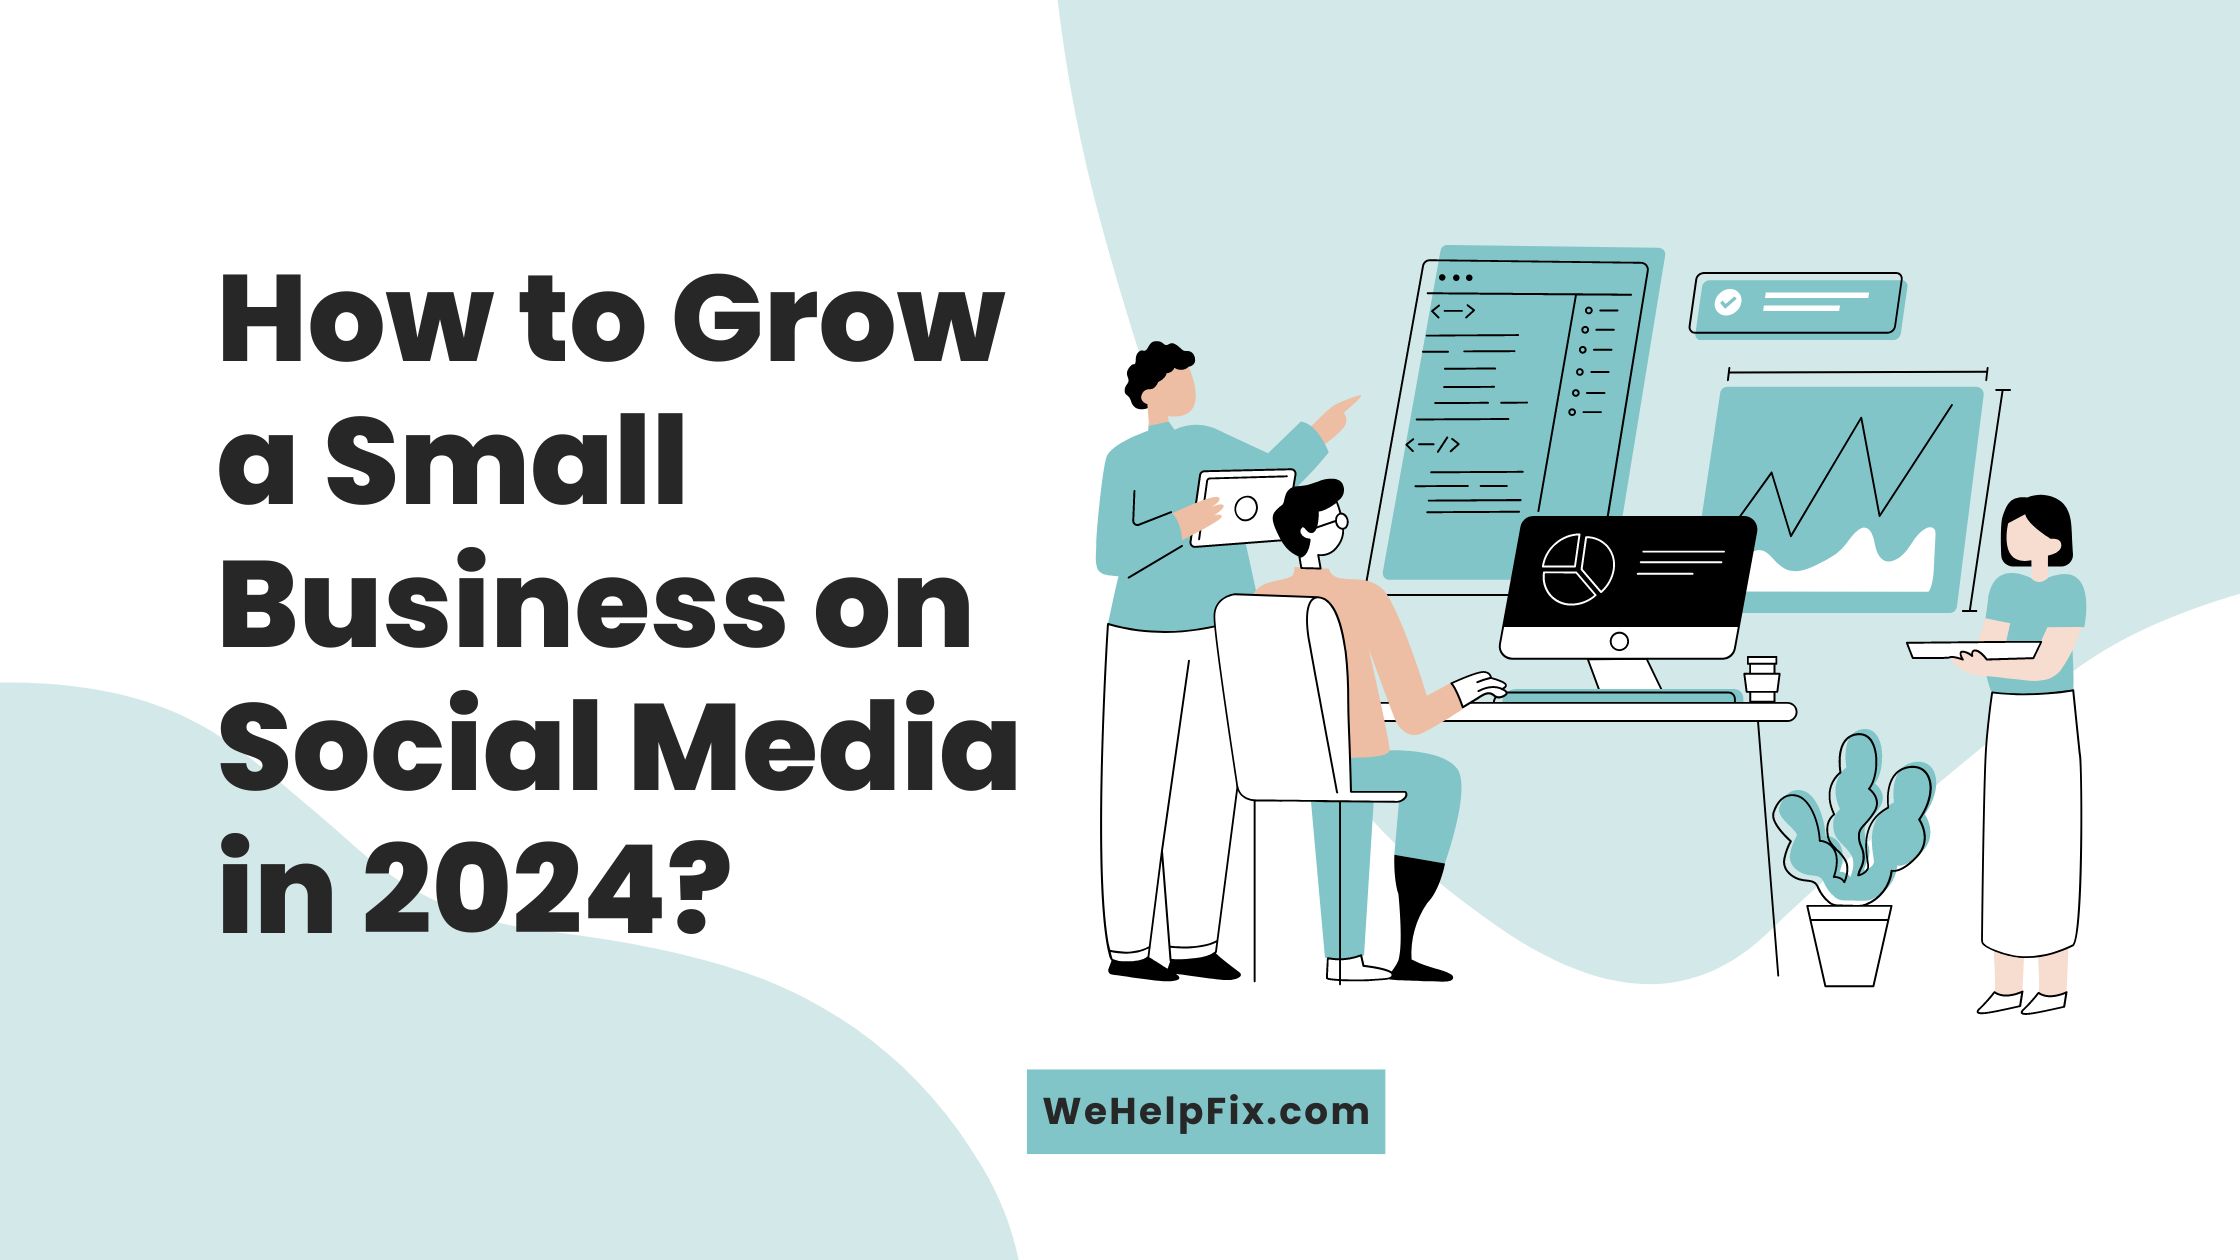 How to Grow a Small Business on Social Media in 2024